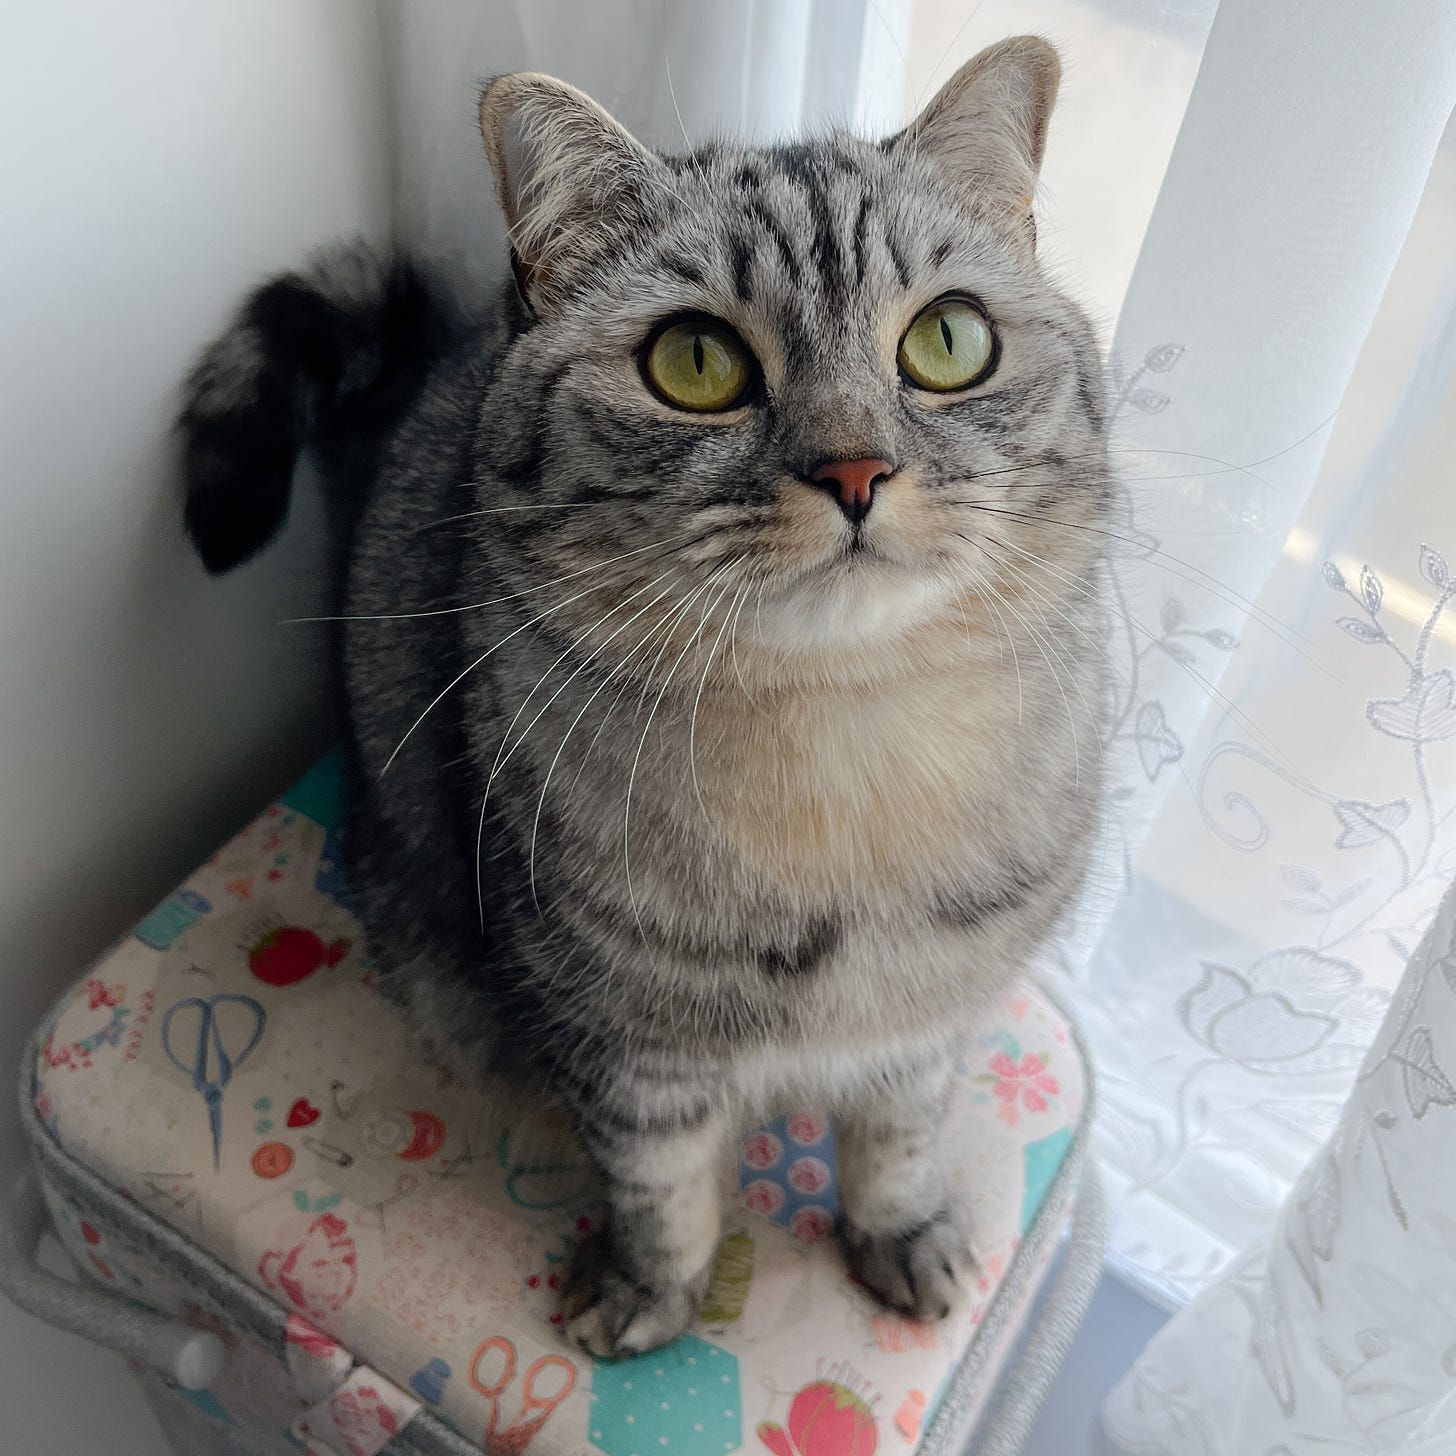 A pale grey cat with dark stripes and a cream colour chest. She has very large eyes and is looking directly at the camera